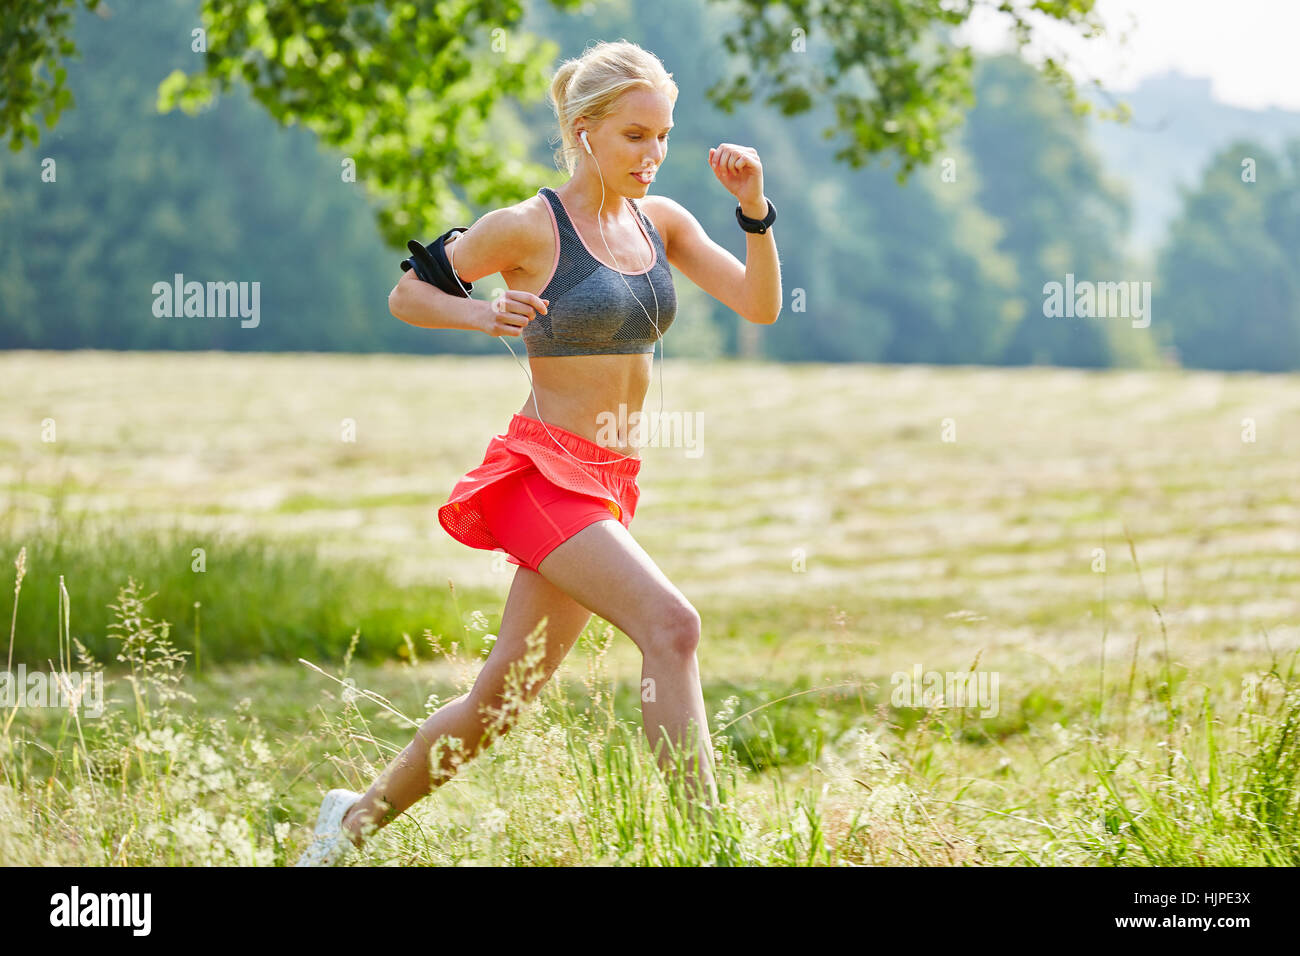 Young woman training hard with persistence for good performance Stock Photo